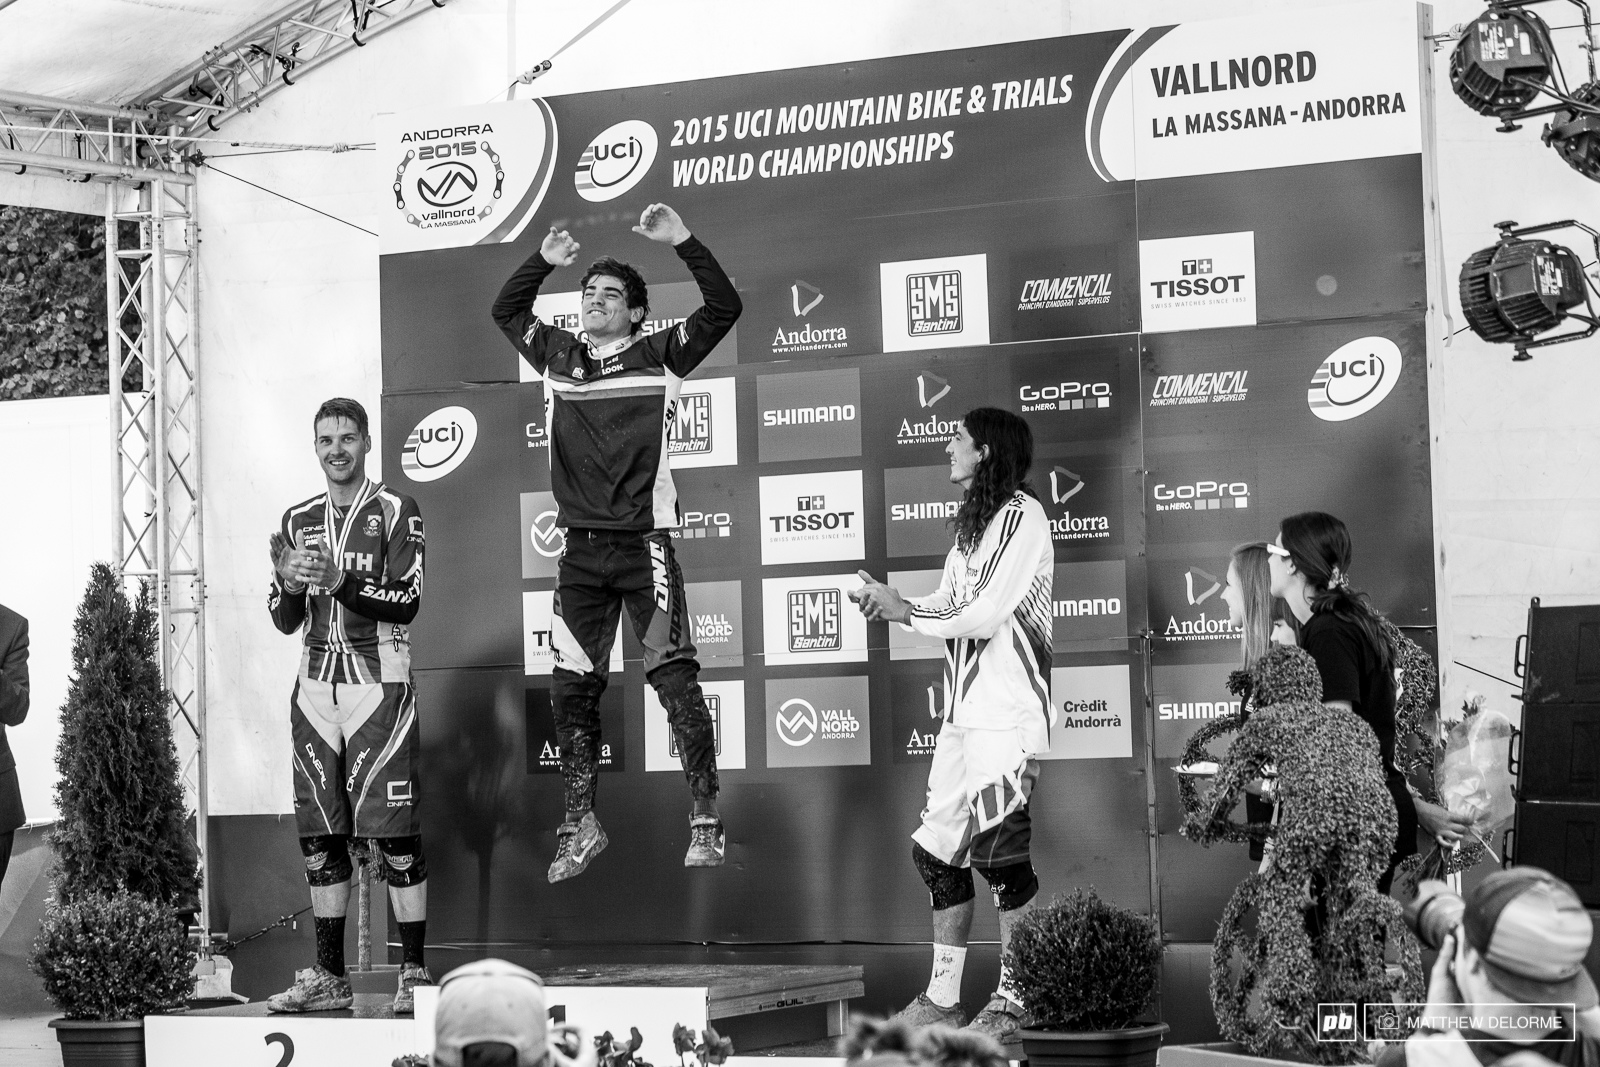 Loic literally jumped for joy when he got to the podium.